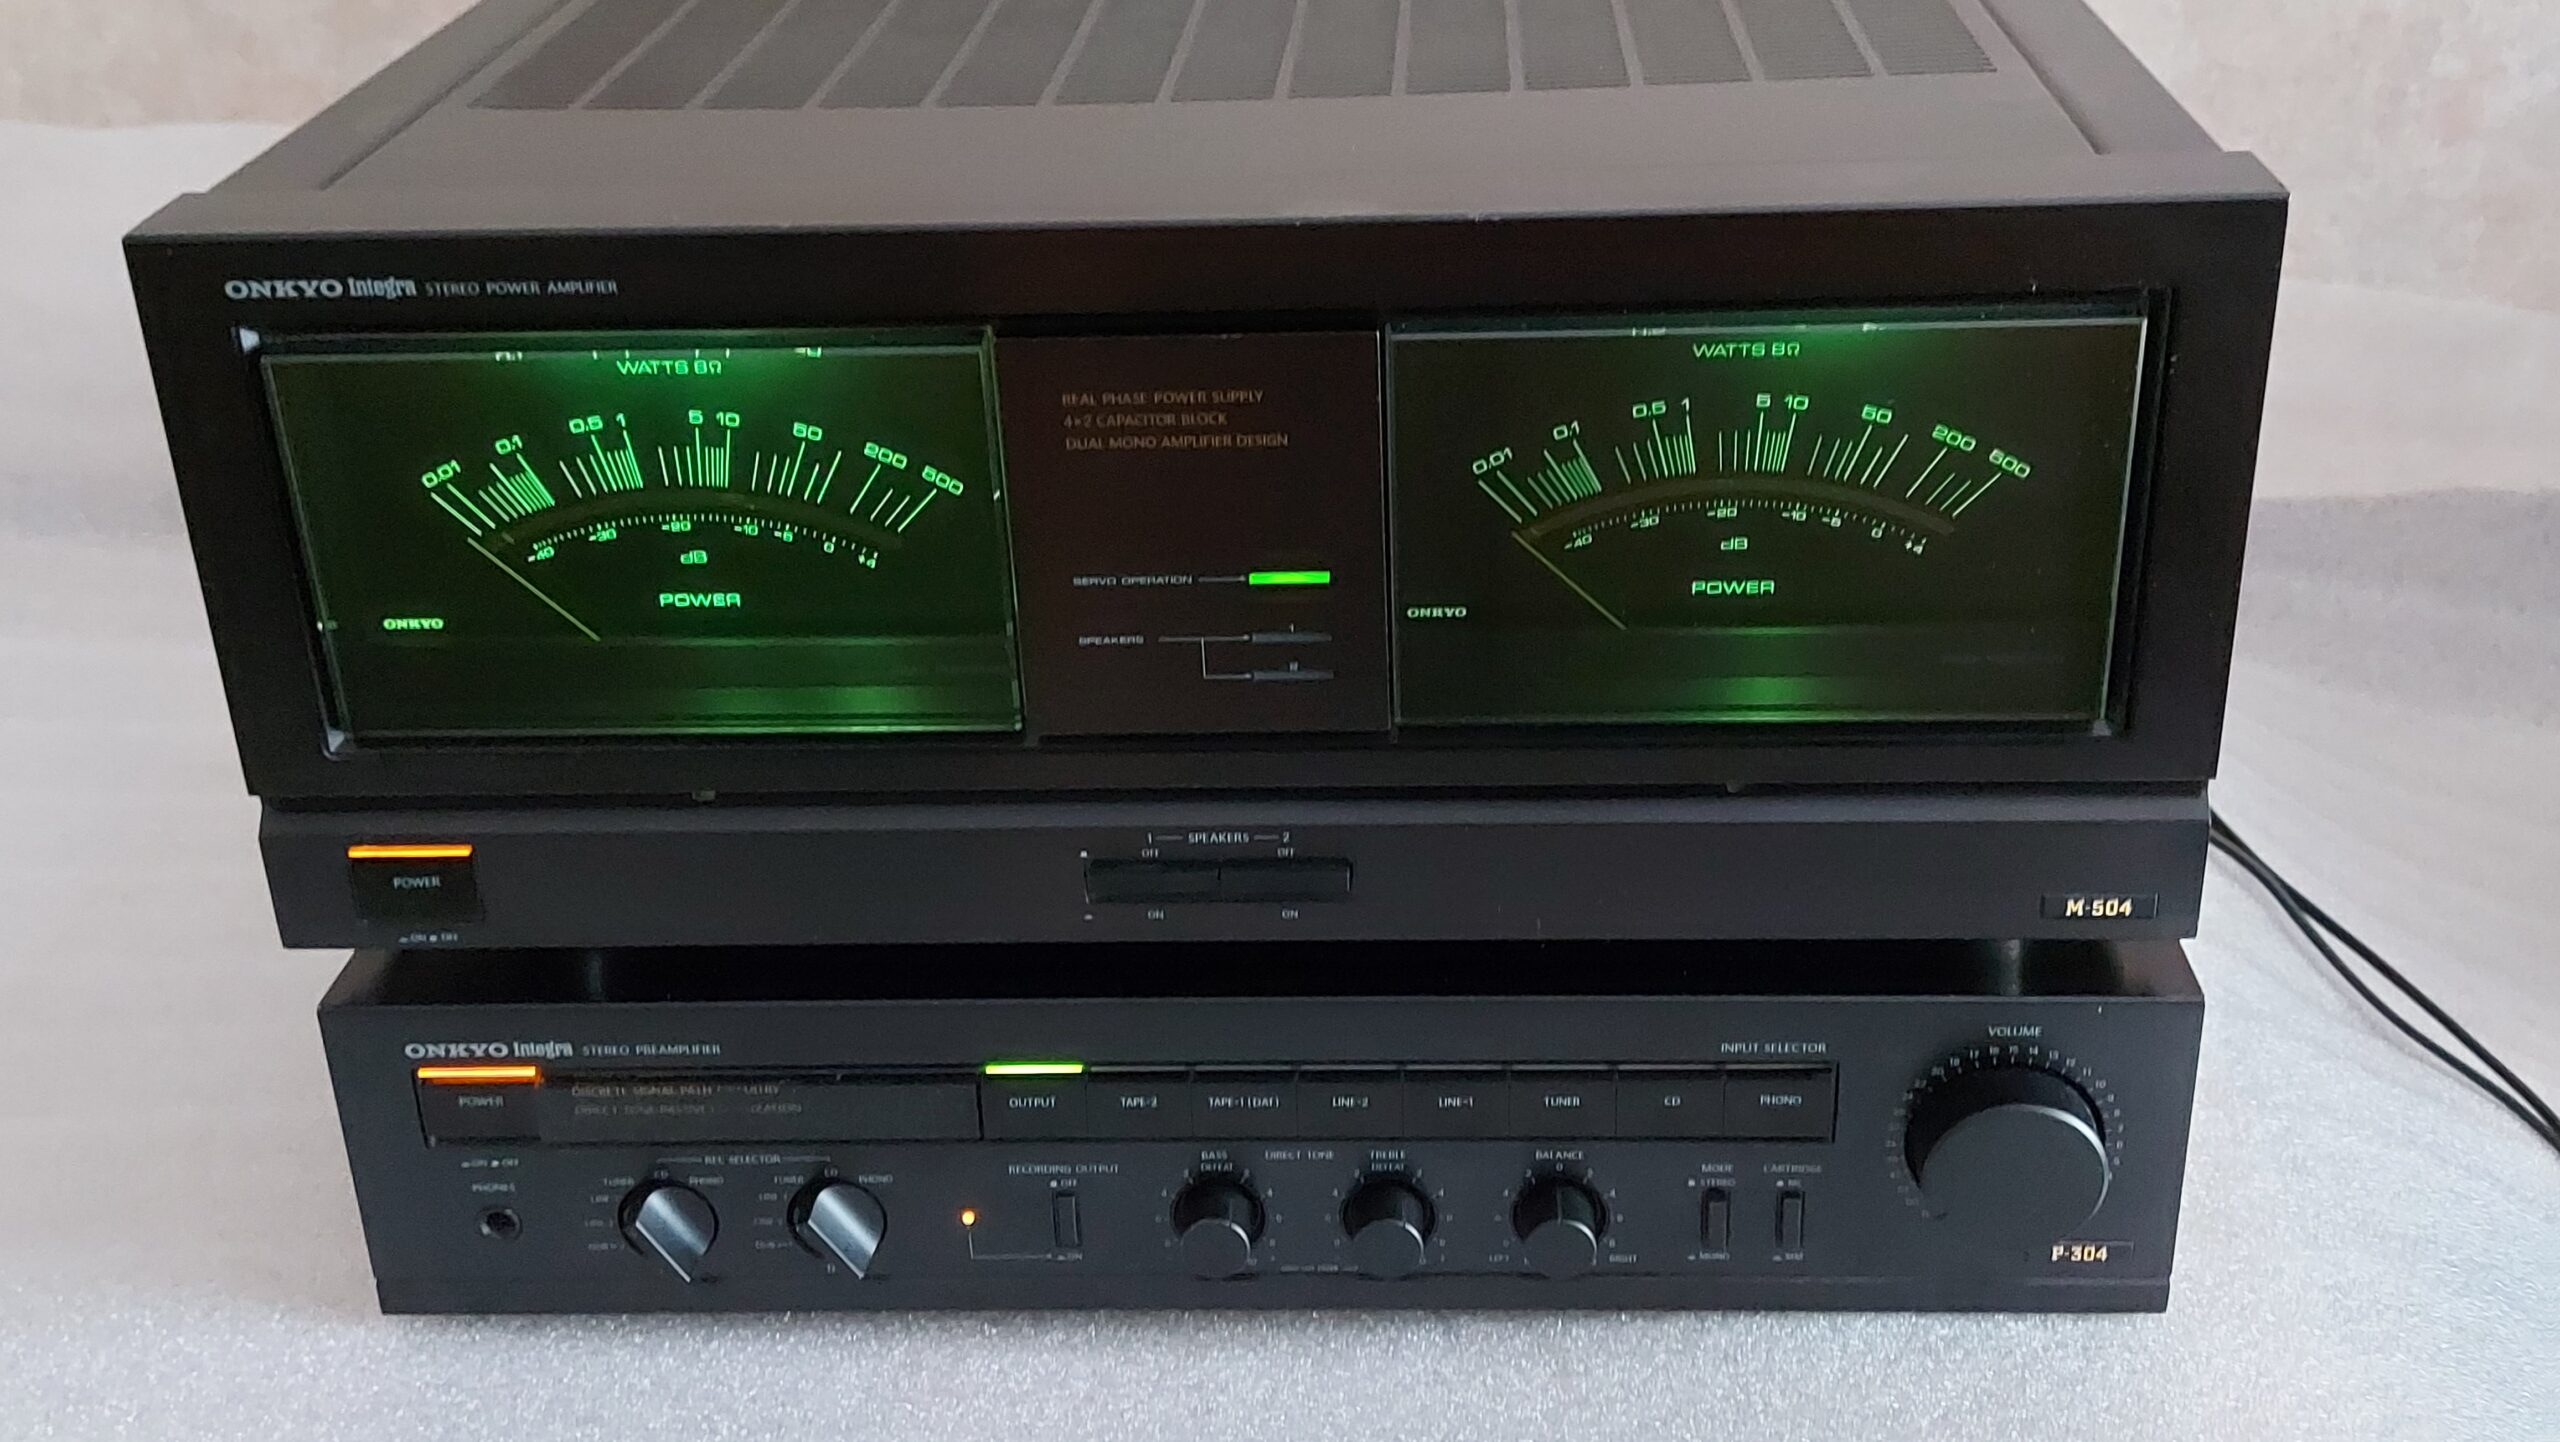 ONKYO INTEGRA Stereo Preamplifier P-304 and Power Amplifier M-504